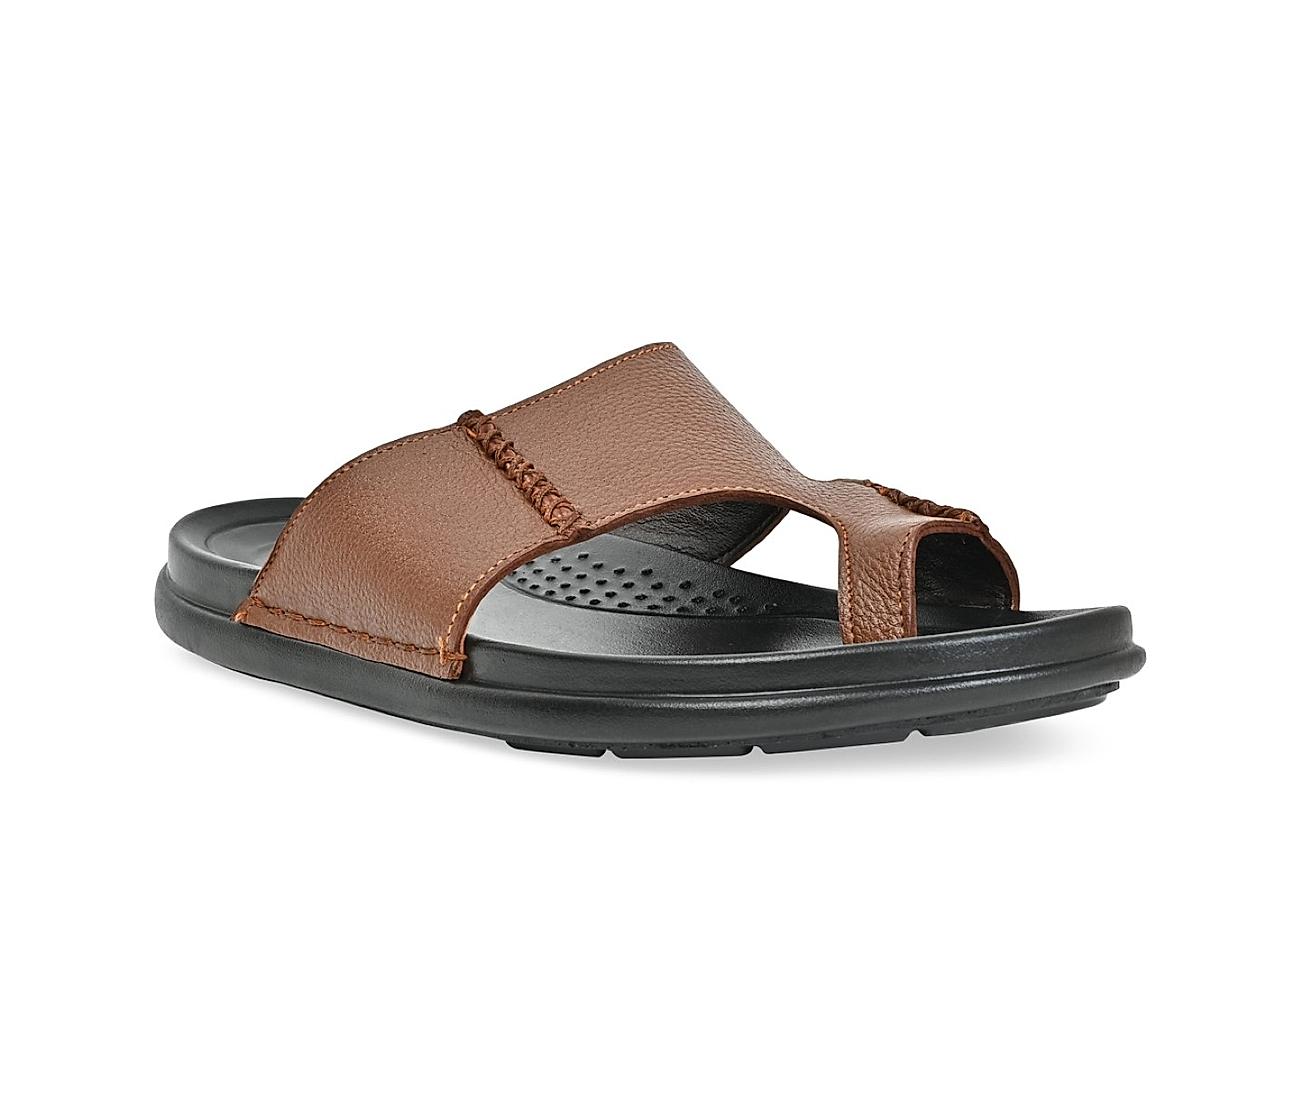 oruga Black Sandals for Women - Fall/Winter collection - Camper USA